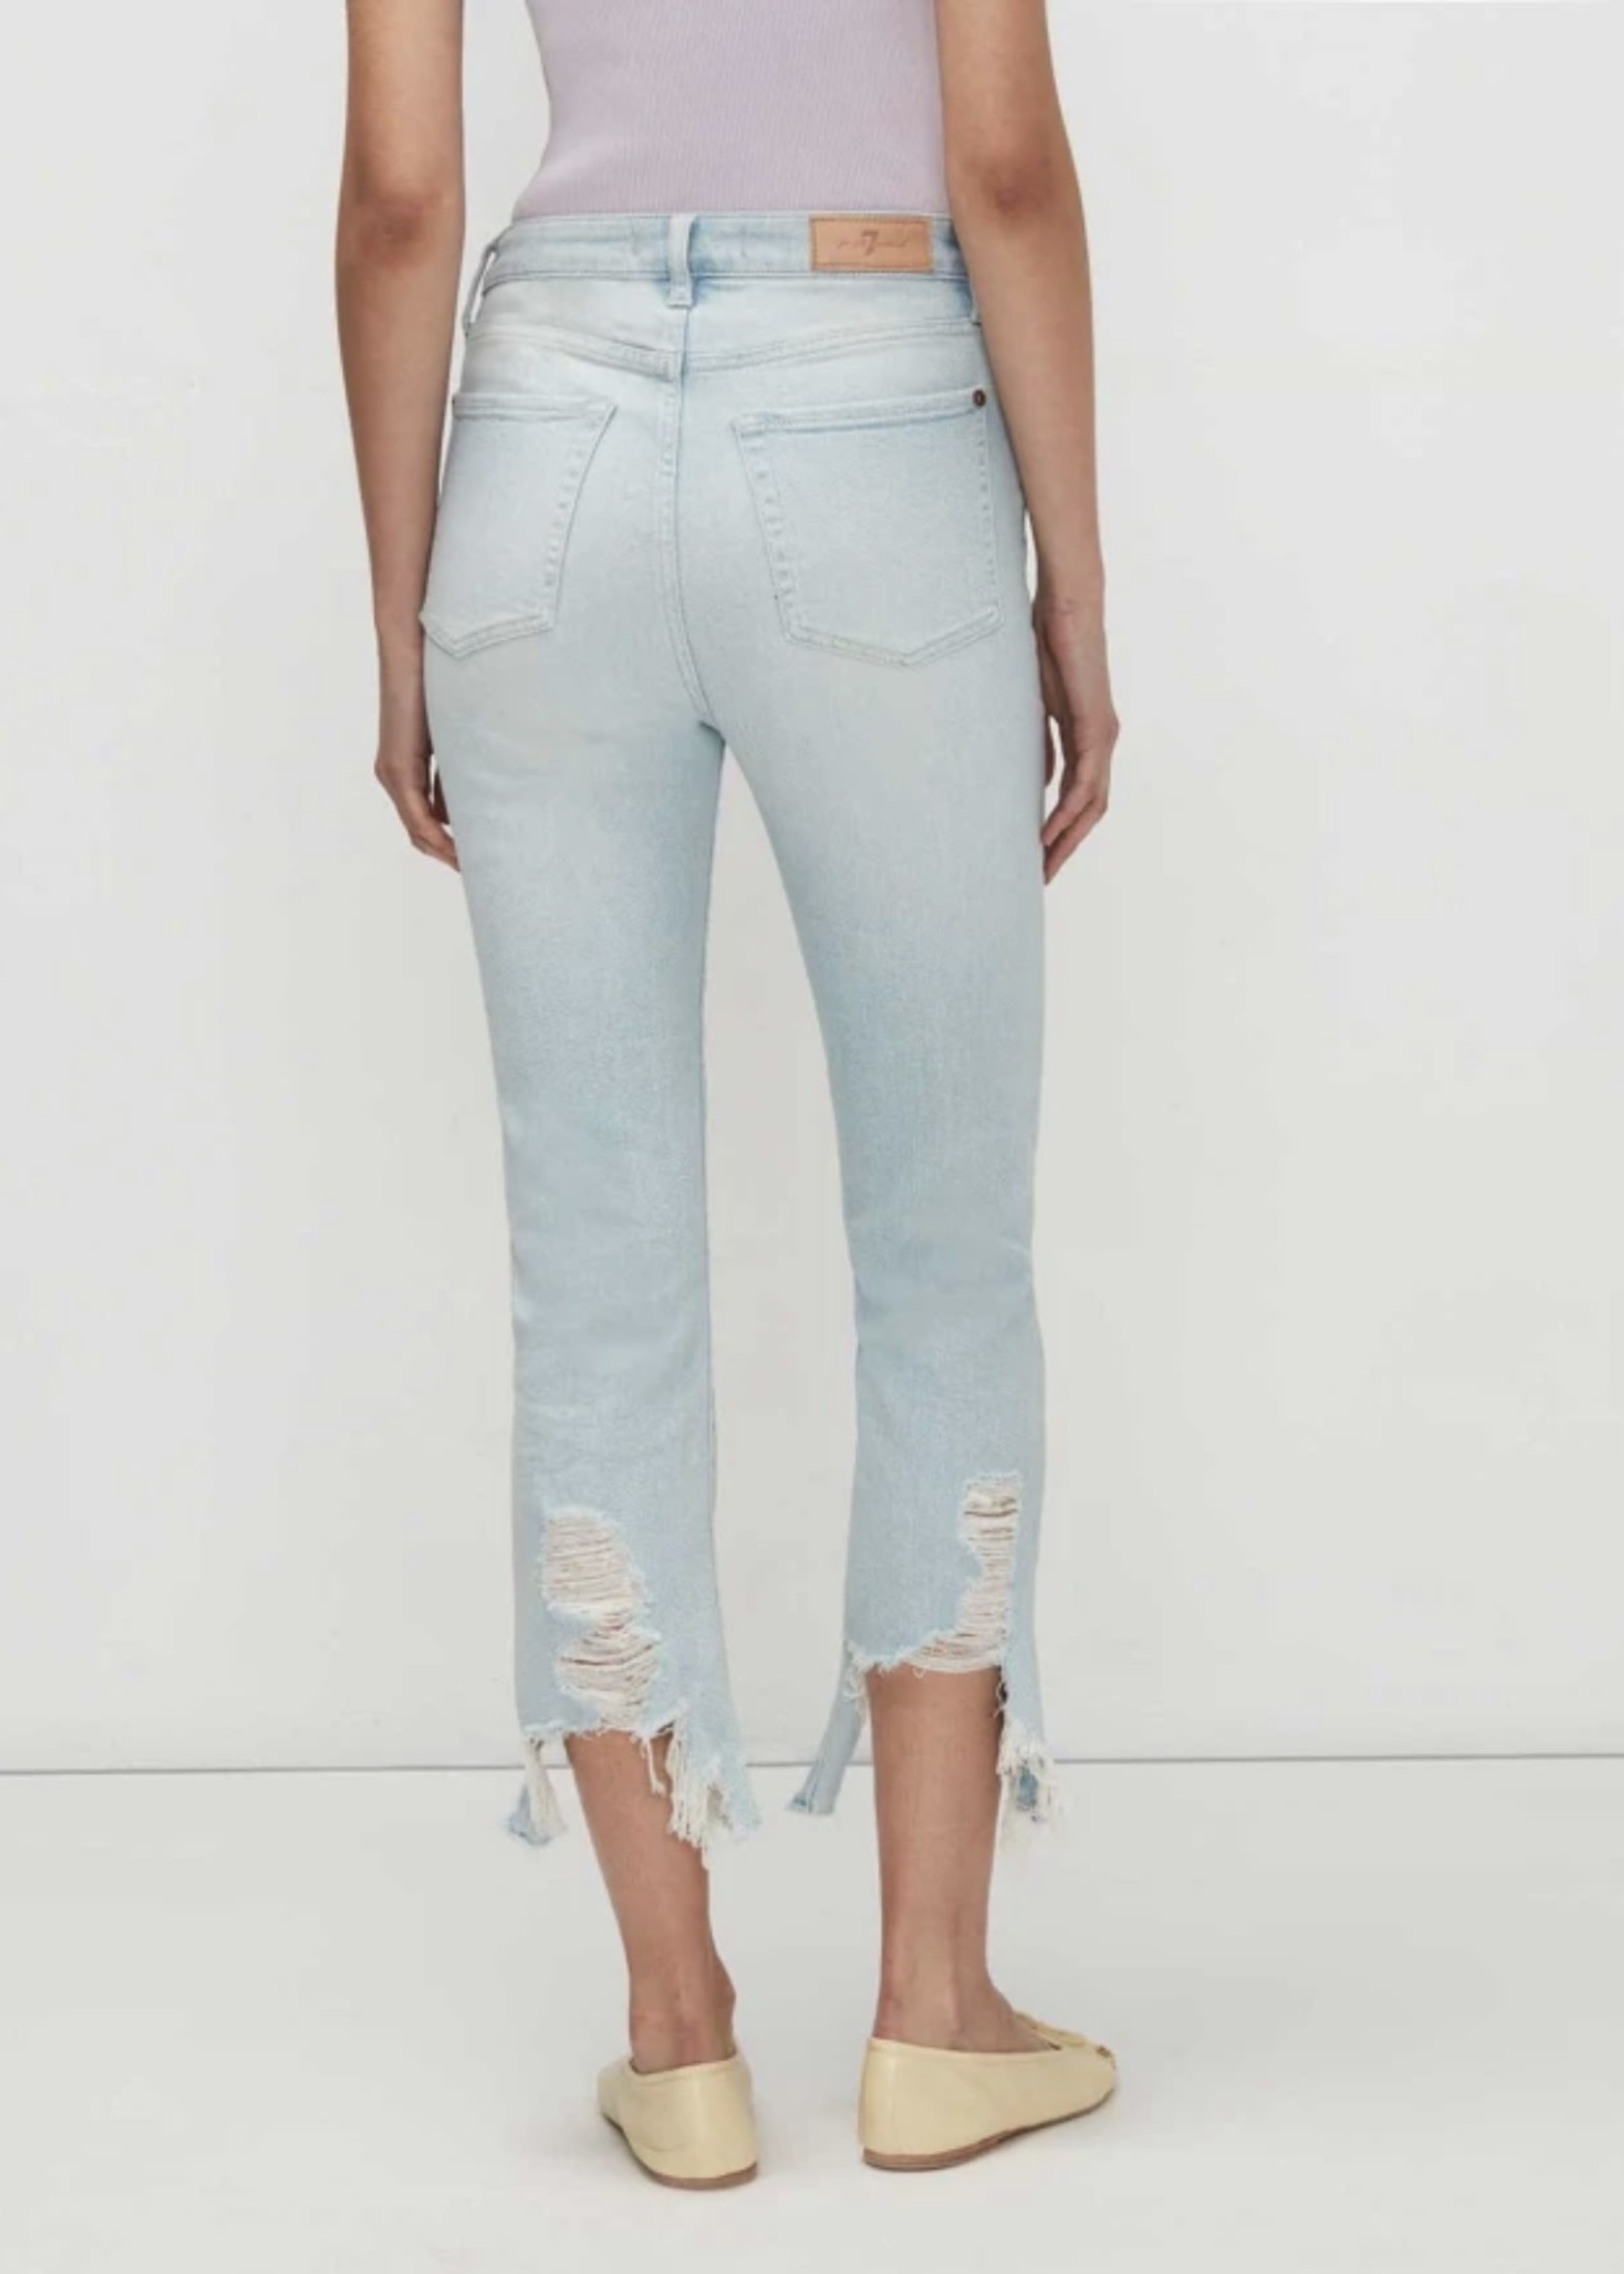 7 For All Mankind 7 For All Mankind Luxe Vintage High Waist Slim Kick With Trashed Hem